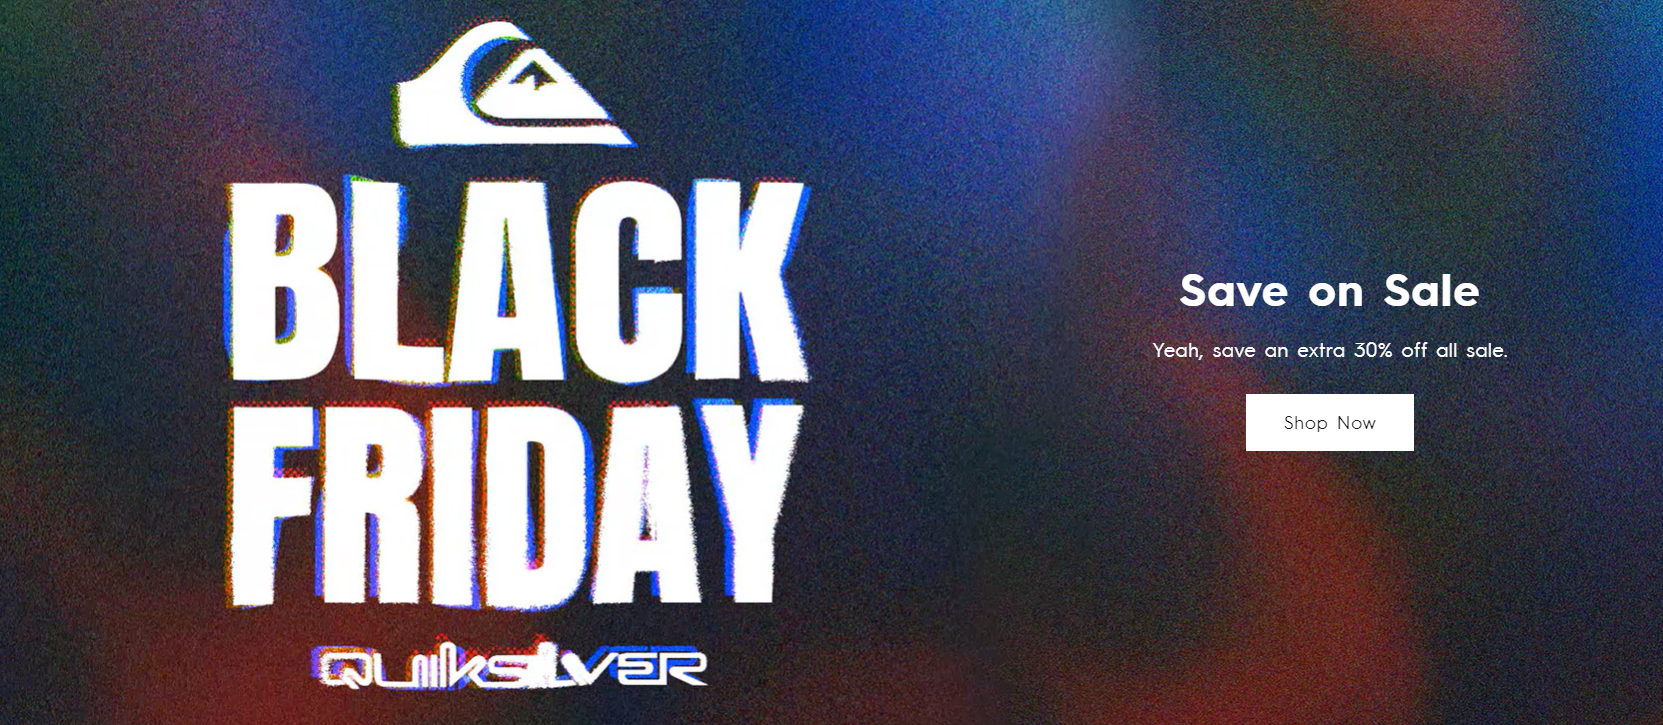 Quiksilver Black Friday extra 30% OFF on sale styles including surfing & snow gear with coupon